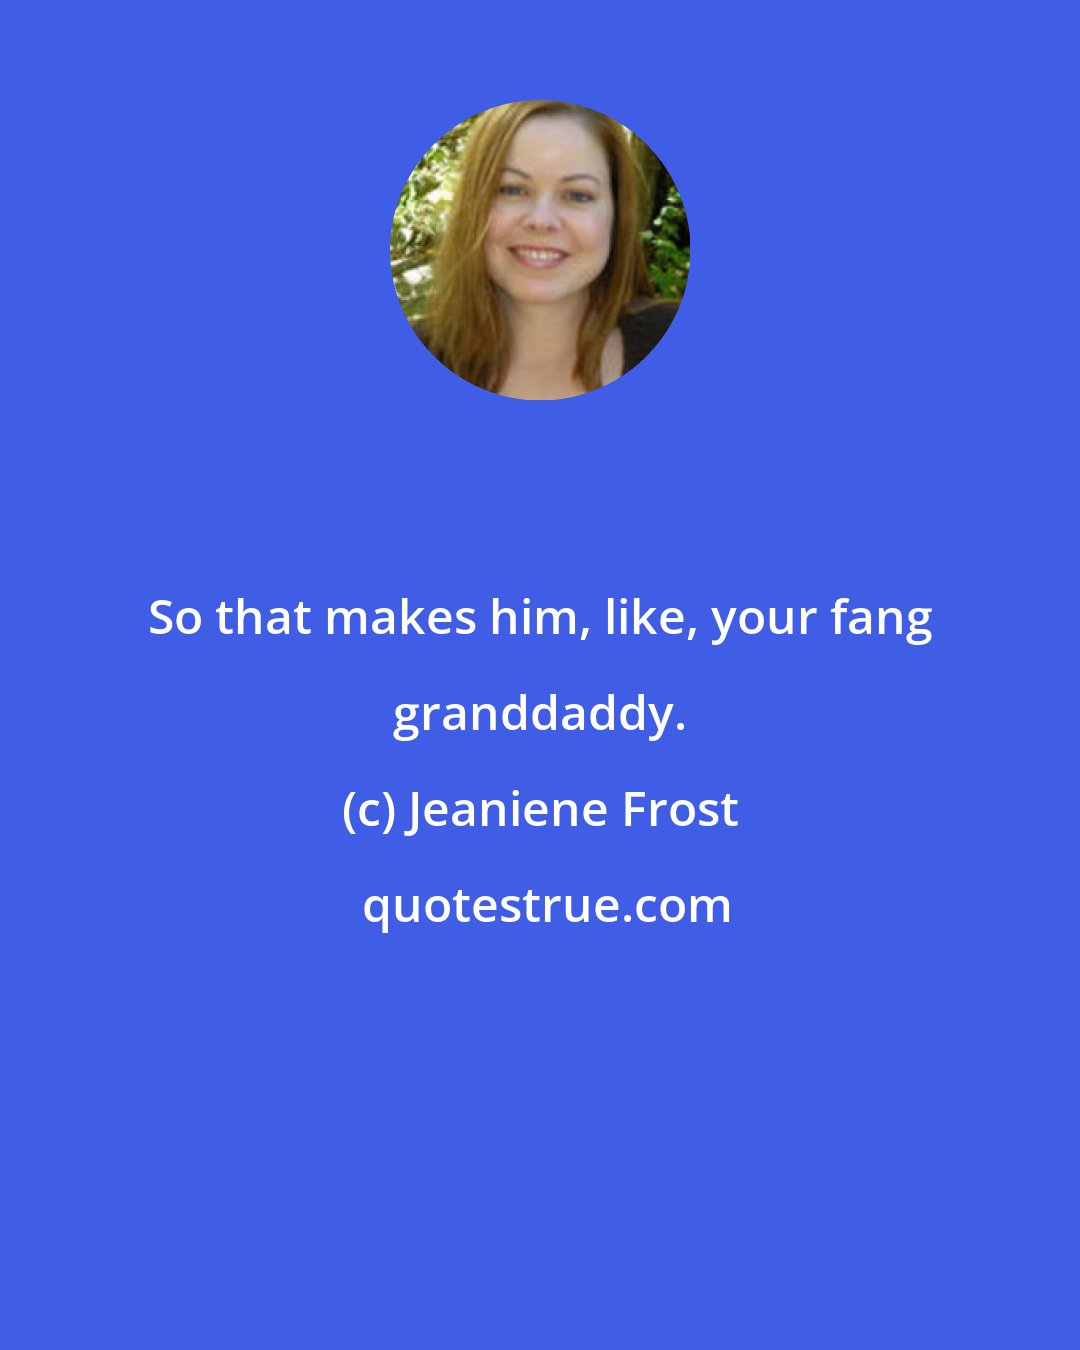 Jeaniene Frost: So that makes him, like, your fang granddaddy.